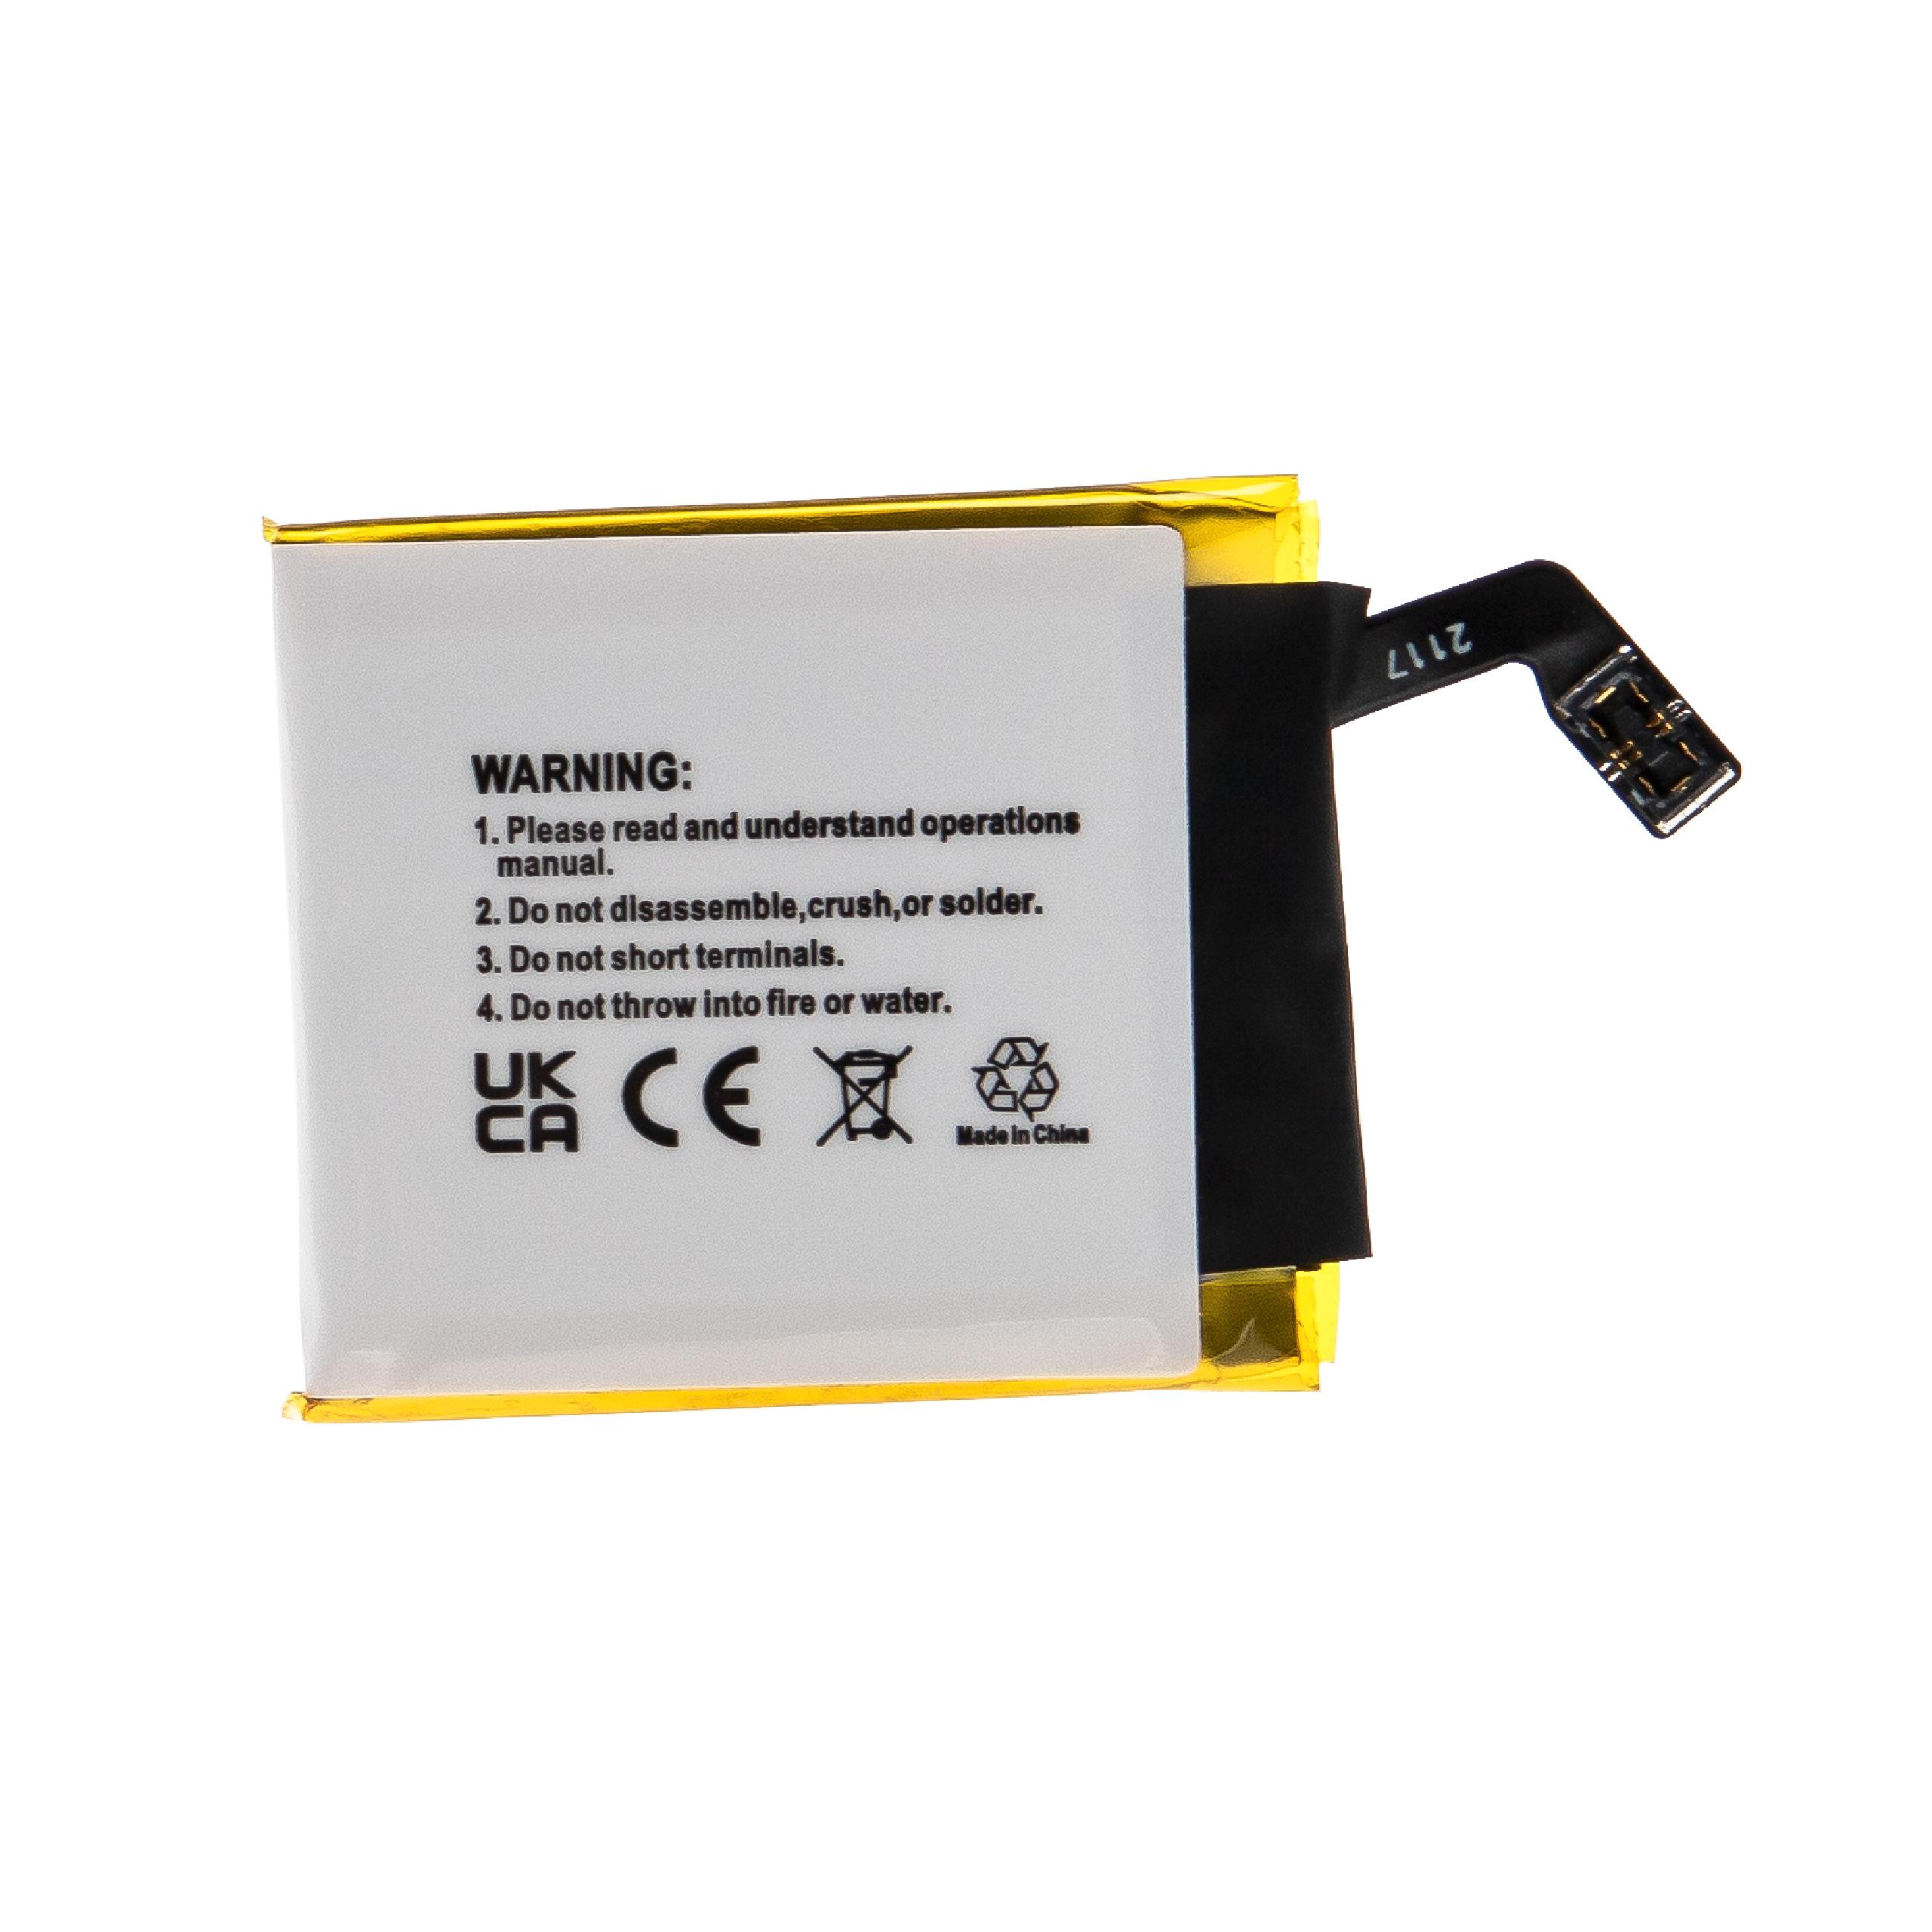 Smartwatch Battery Replacement for Sony GB-S10-432830-010H - 400mAh 3.8V Li-polymer